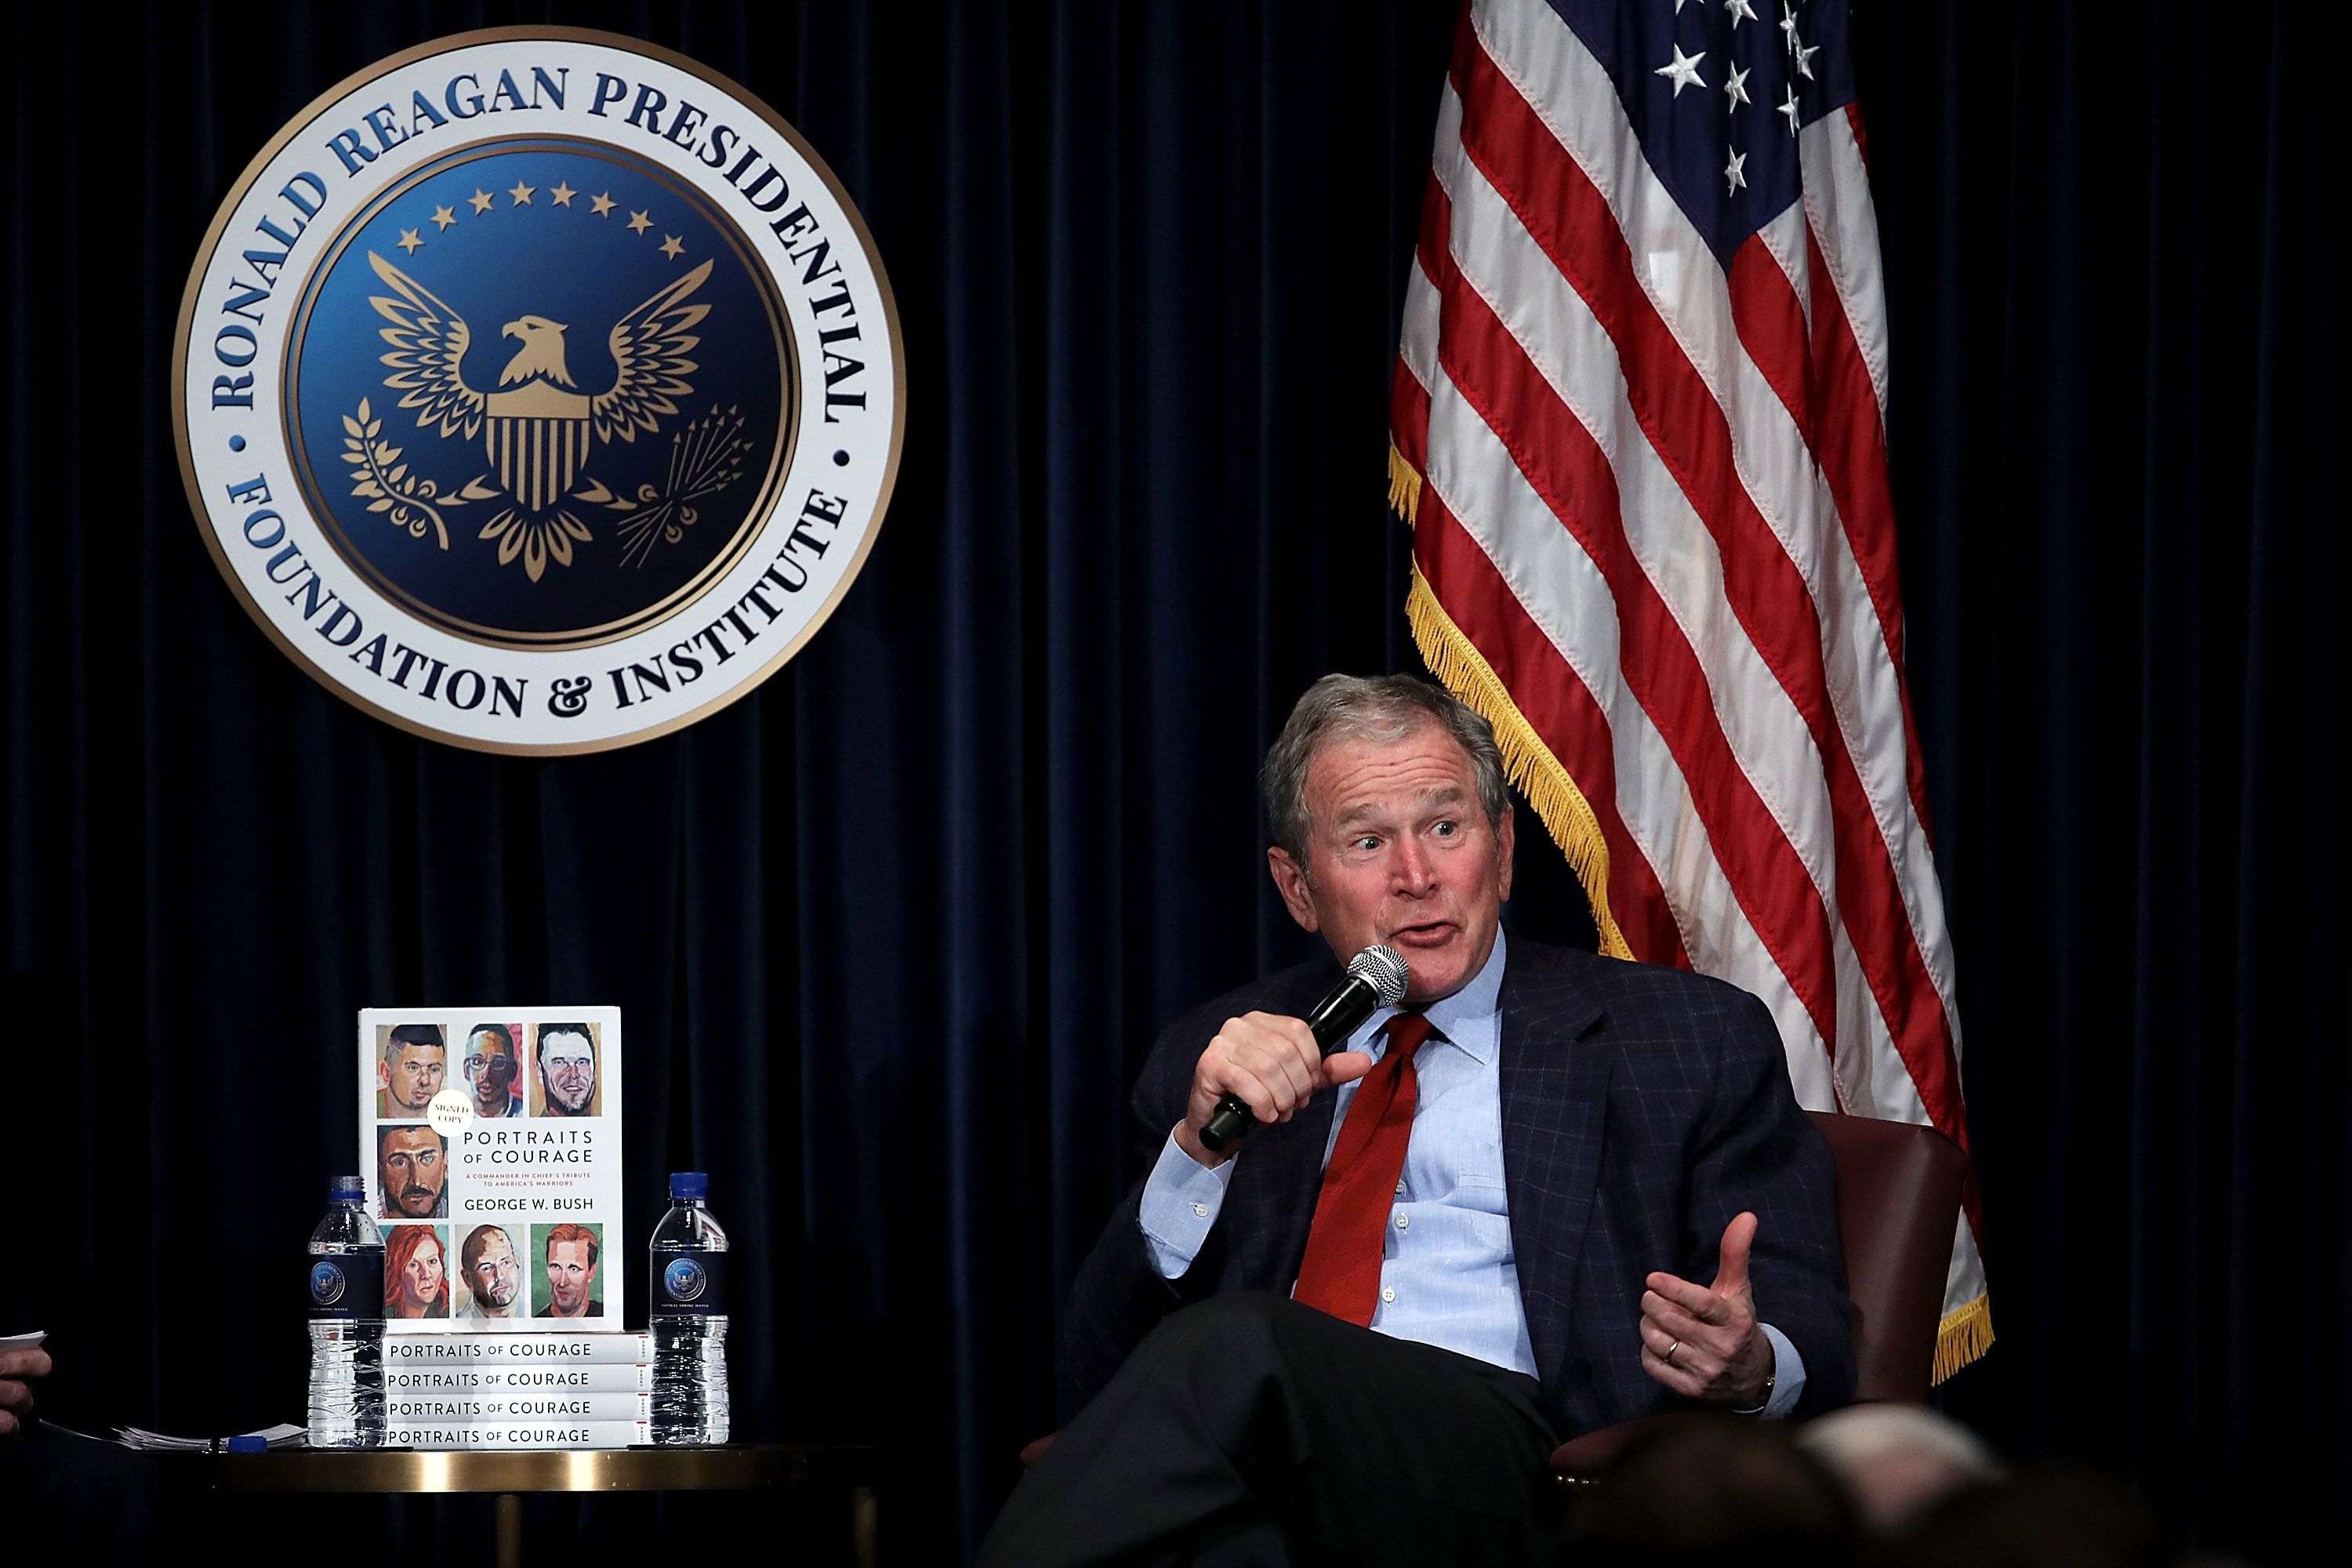 Former U.S. President George W. Bush speaks during a discussion about his new book "Portraits of Courage: A Commander in Chief's Tribute to America's Warriors" at the Ronald Reagan Presidential Library on March 1, 2017 in Simi Valley, California. (Justin Sullivan—Getty Images)